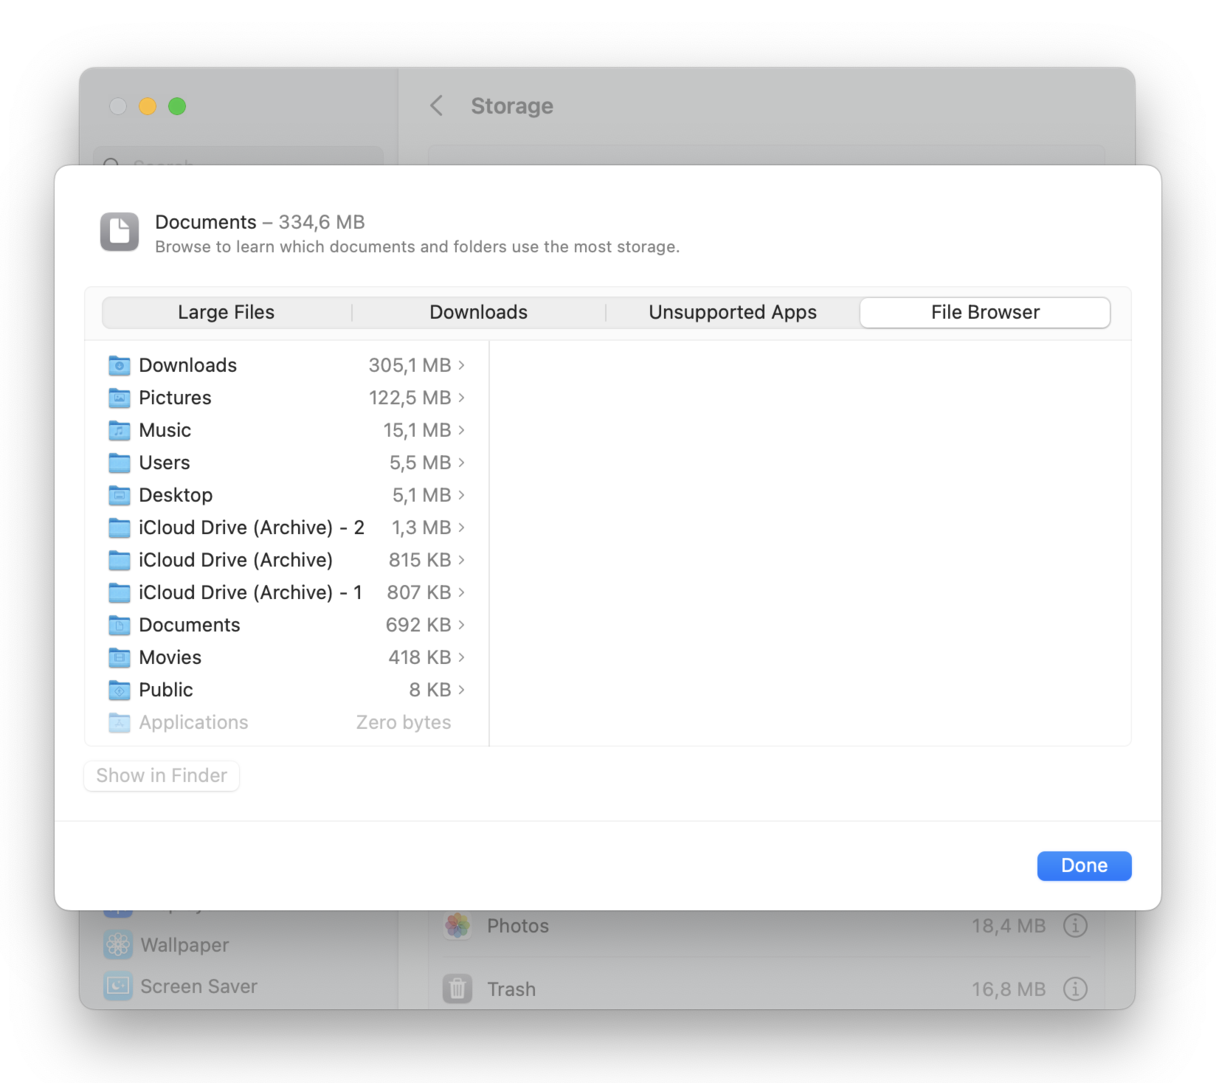 how to clear storage on macbook